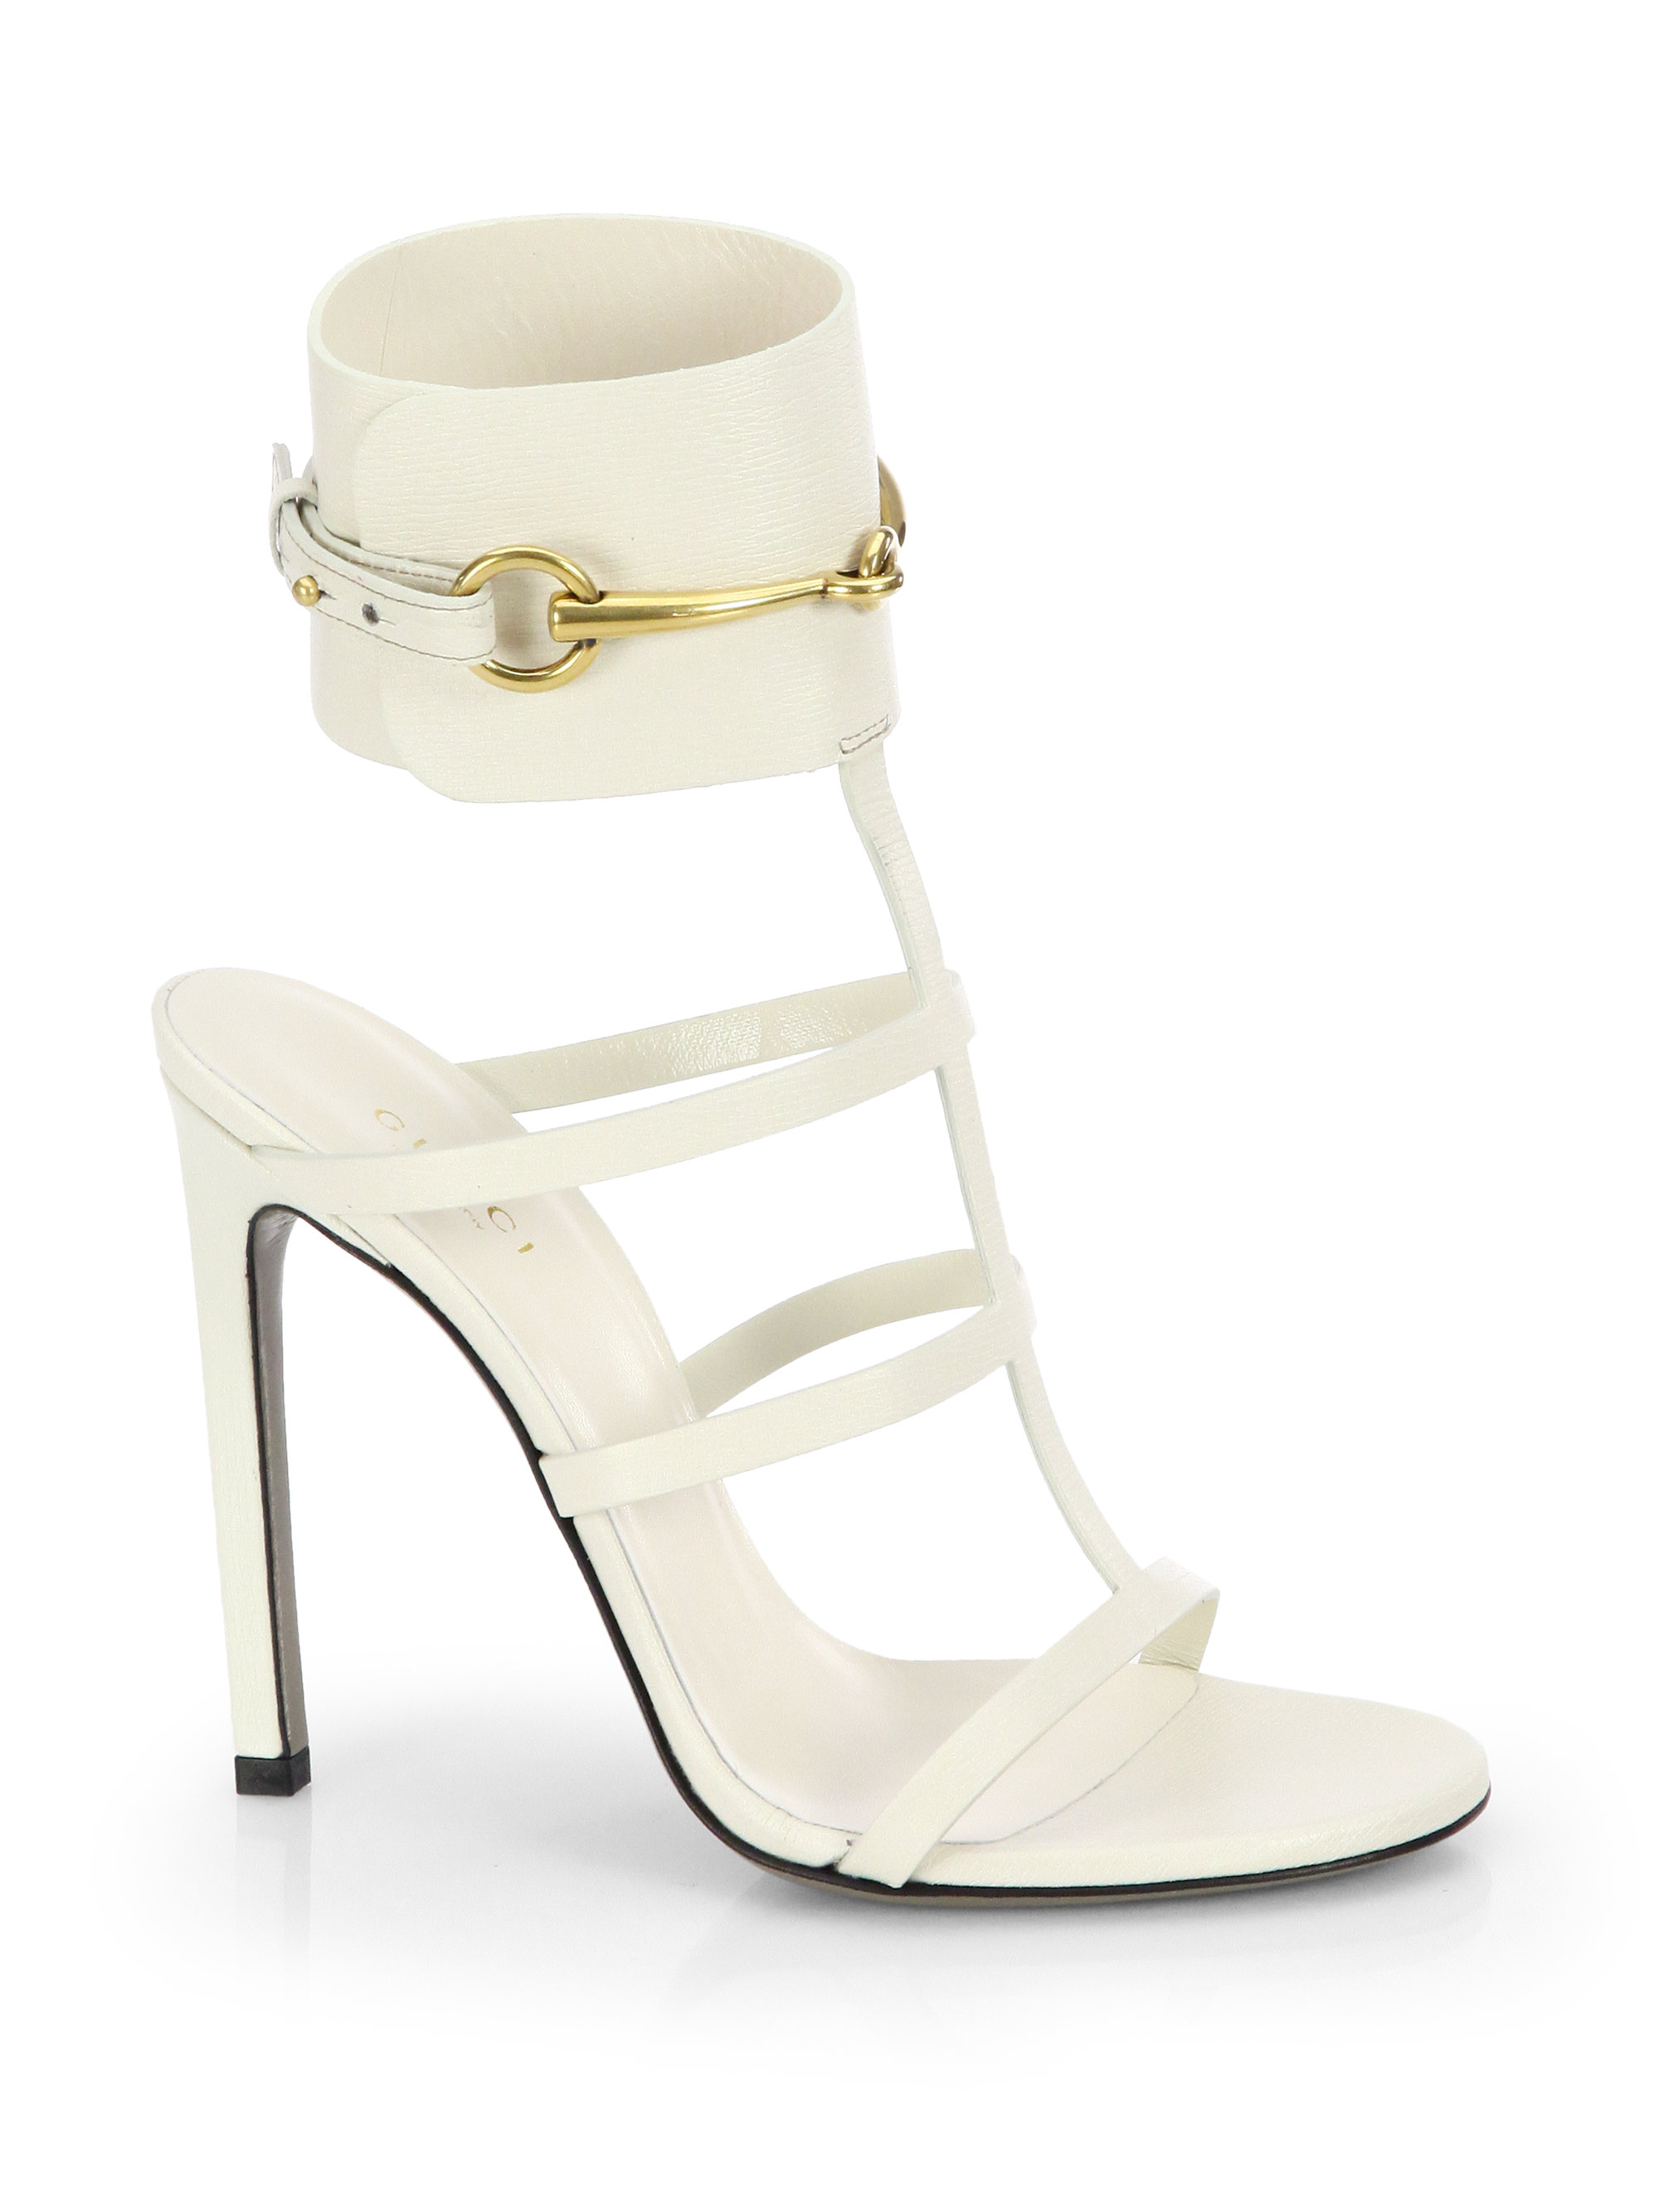 Gucci Ursula Leather Cage Sandals in White | Lyst